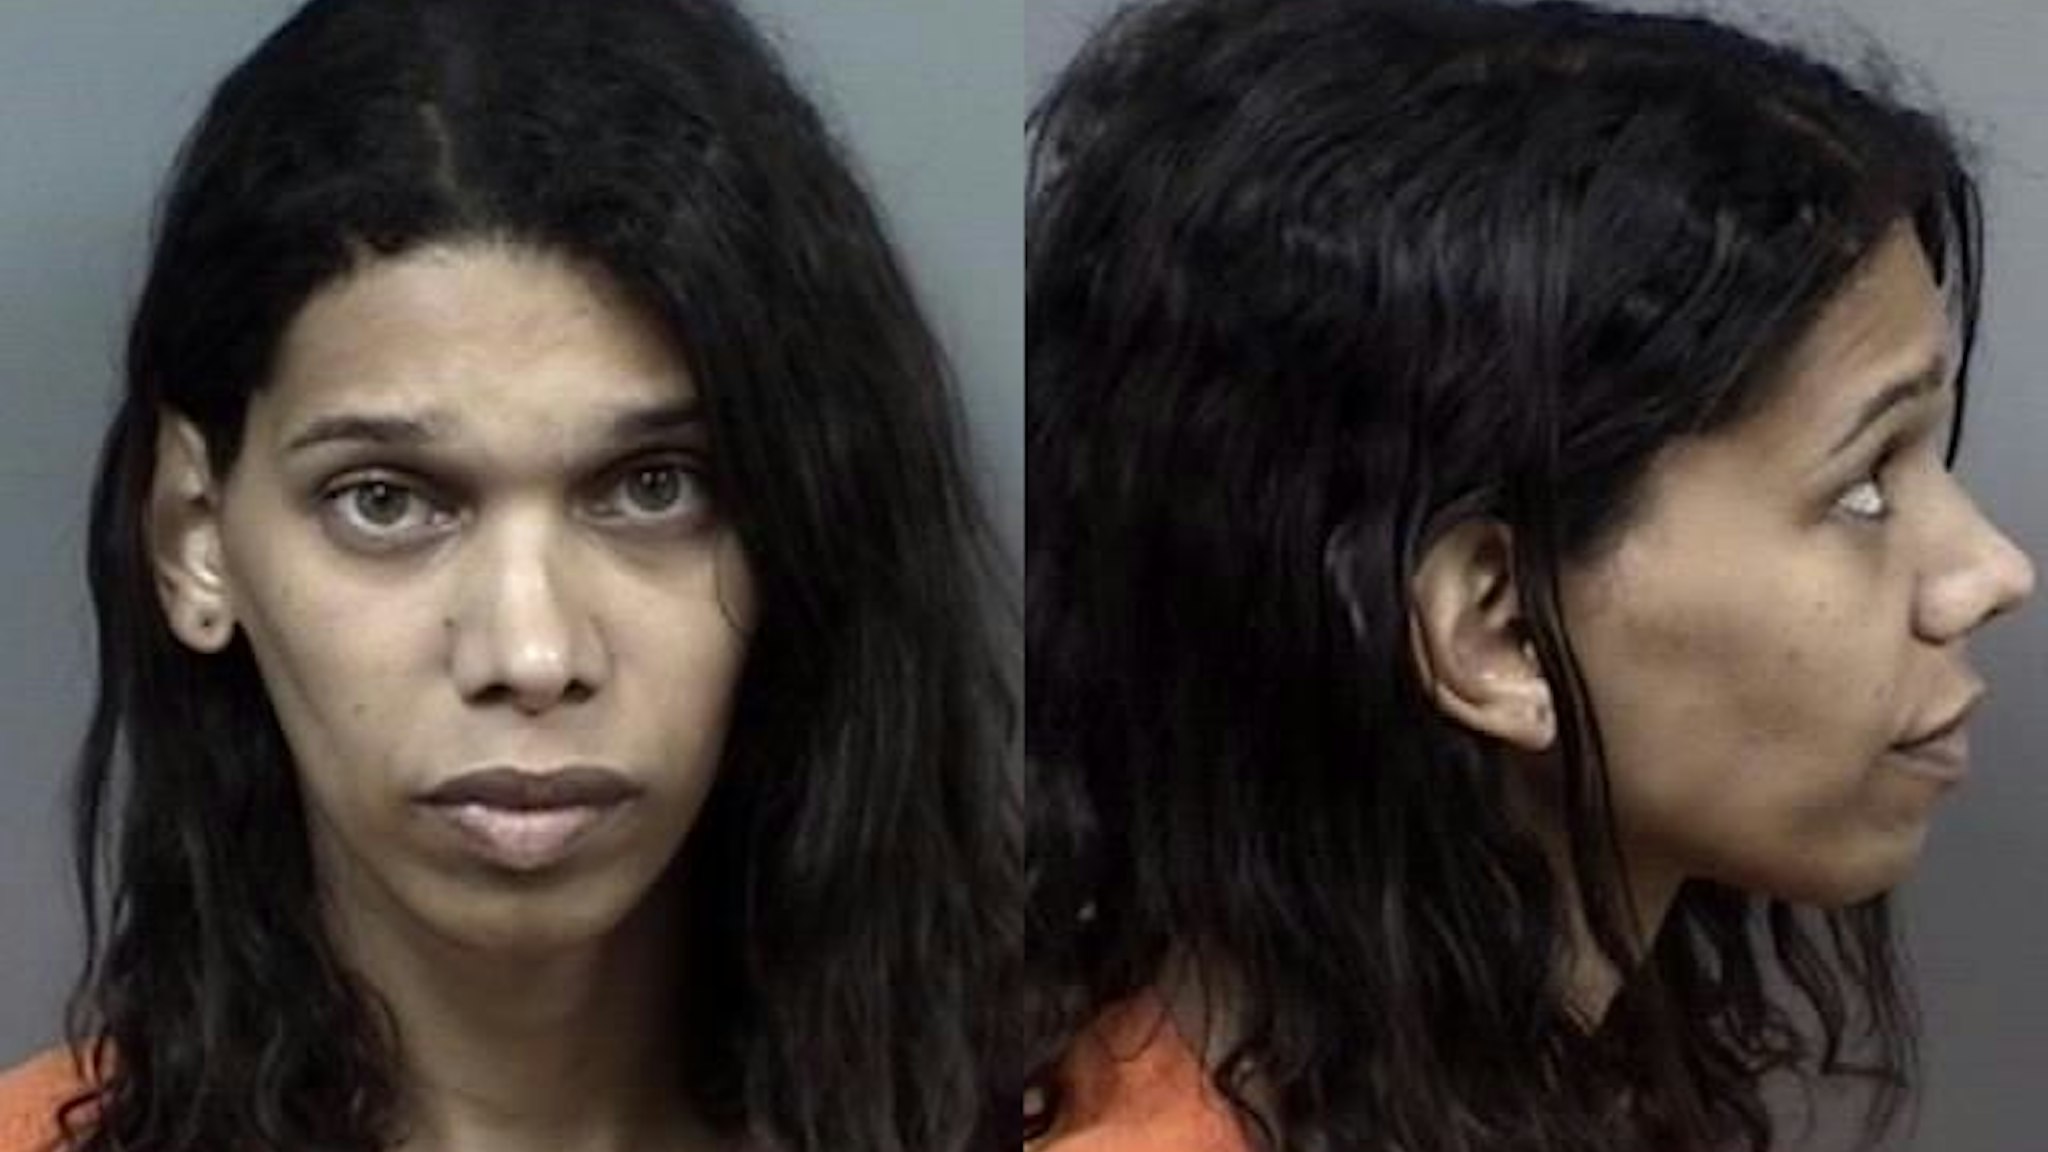 Diana Elizabeth Guevara, 33, was arrested and charged with multiple counts of sexually abusing minors.